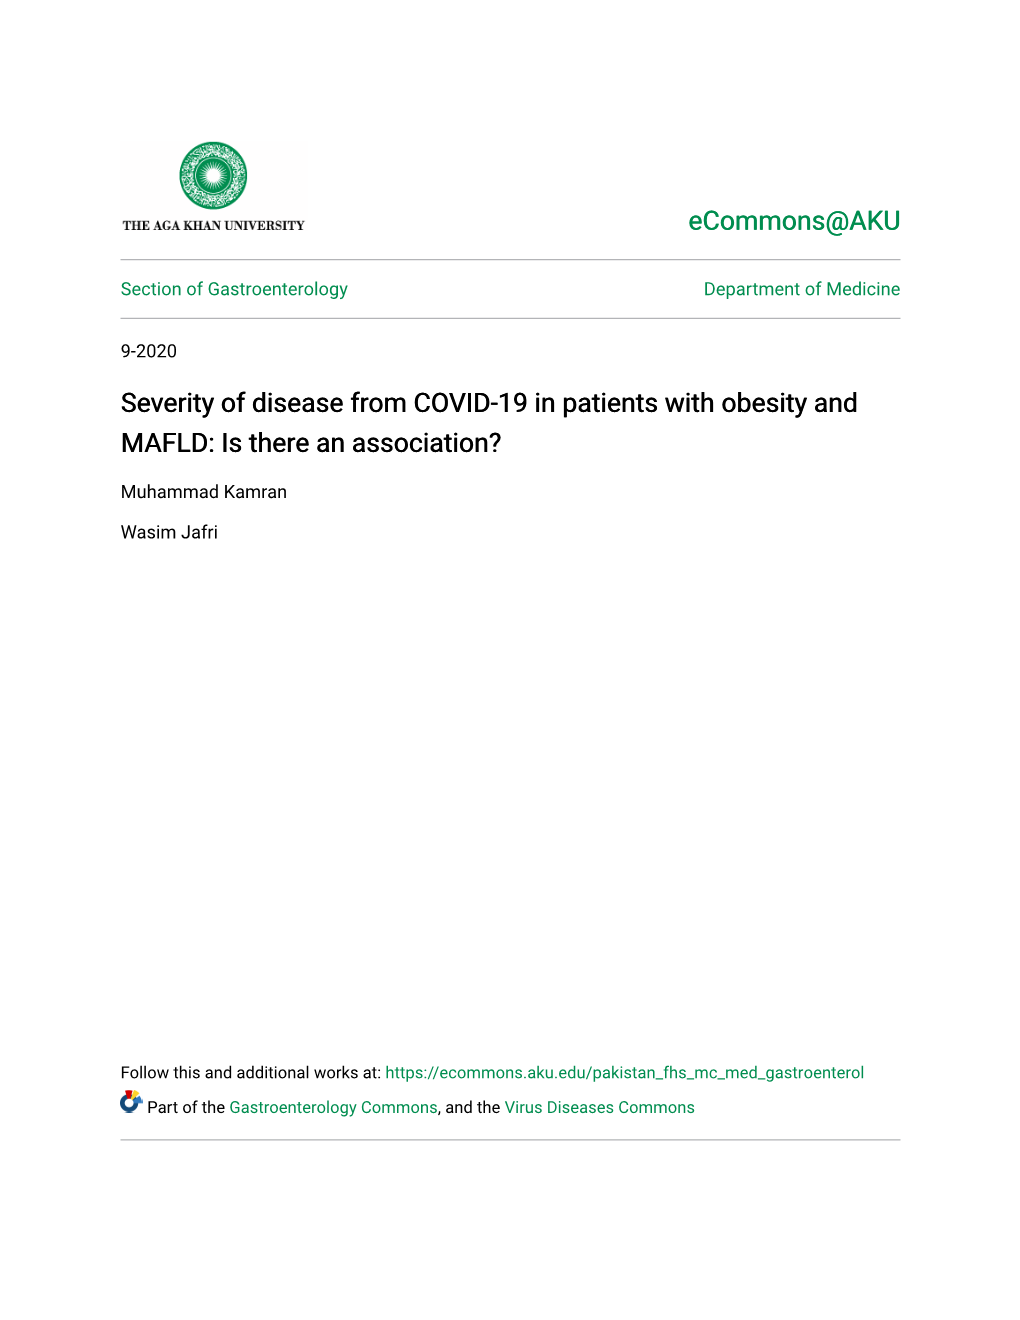 Severity of Disease from COVID-19 in Patients with Obesity and MAFLD: Is There an Association?